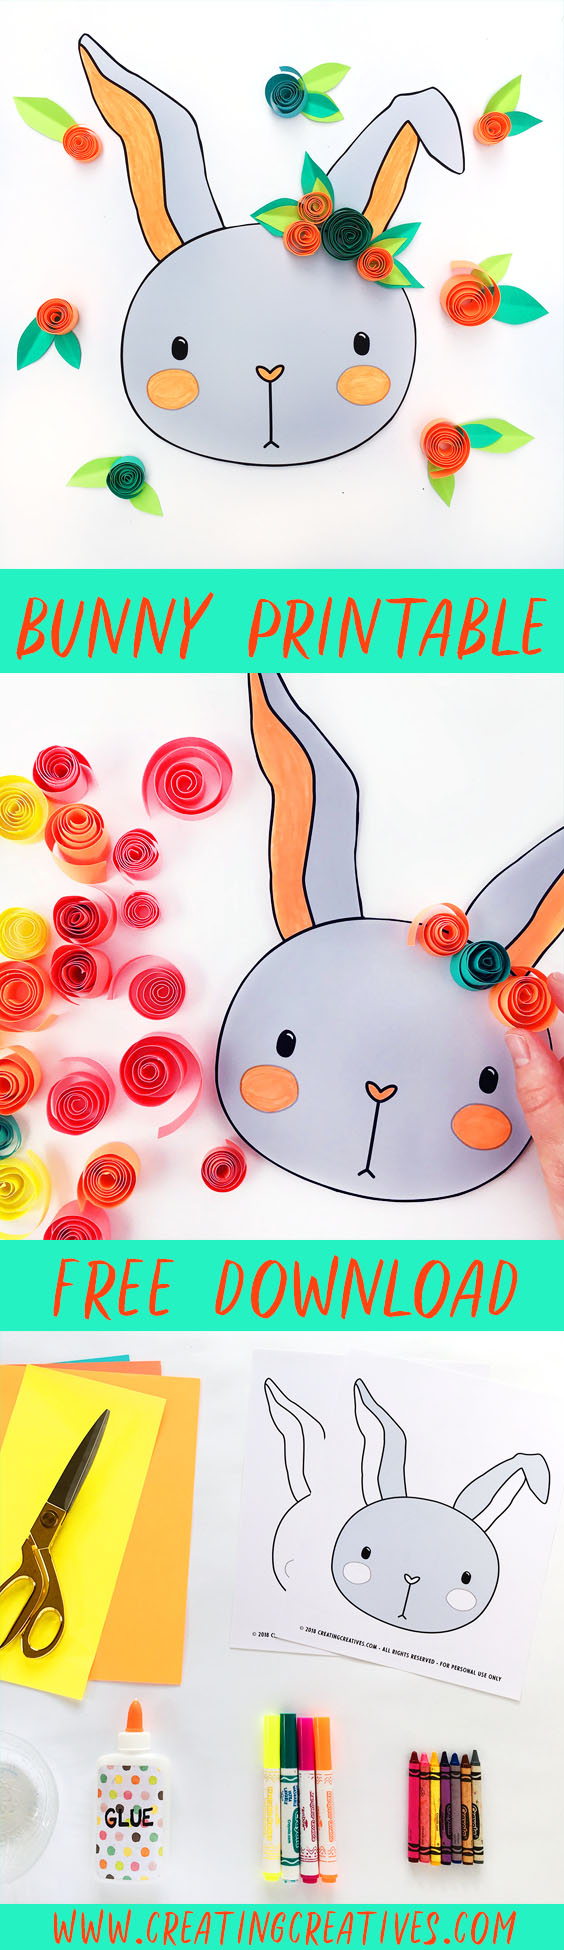 Free Bunny Printable to Color and Decorate